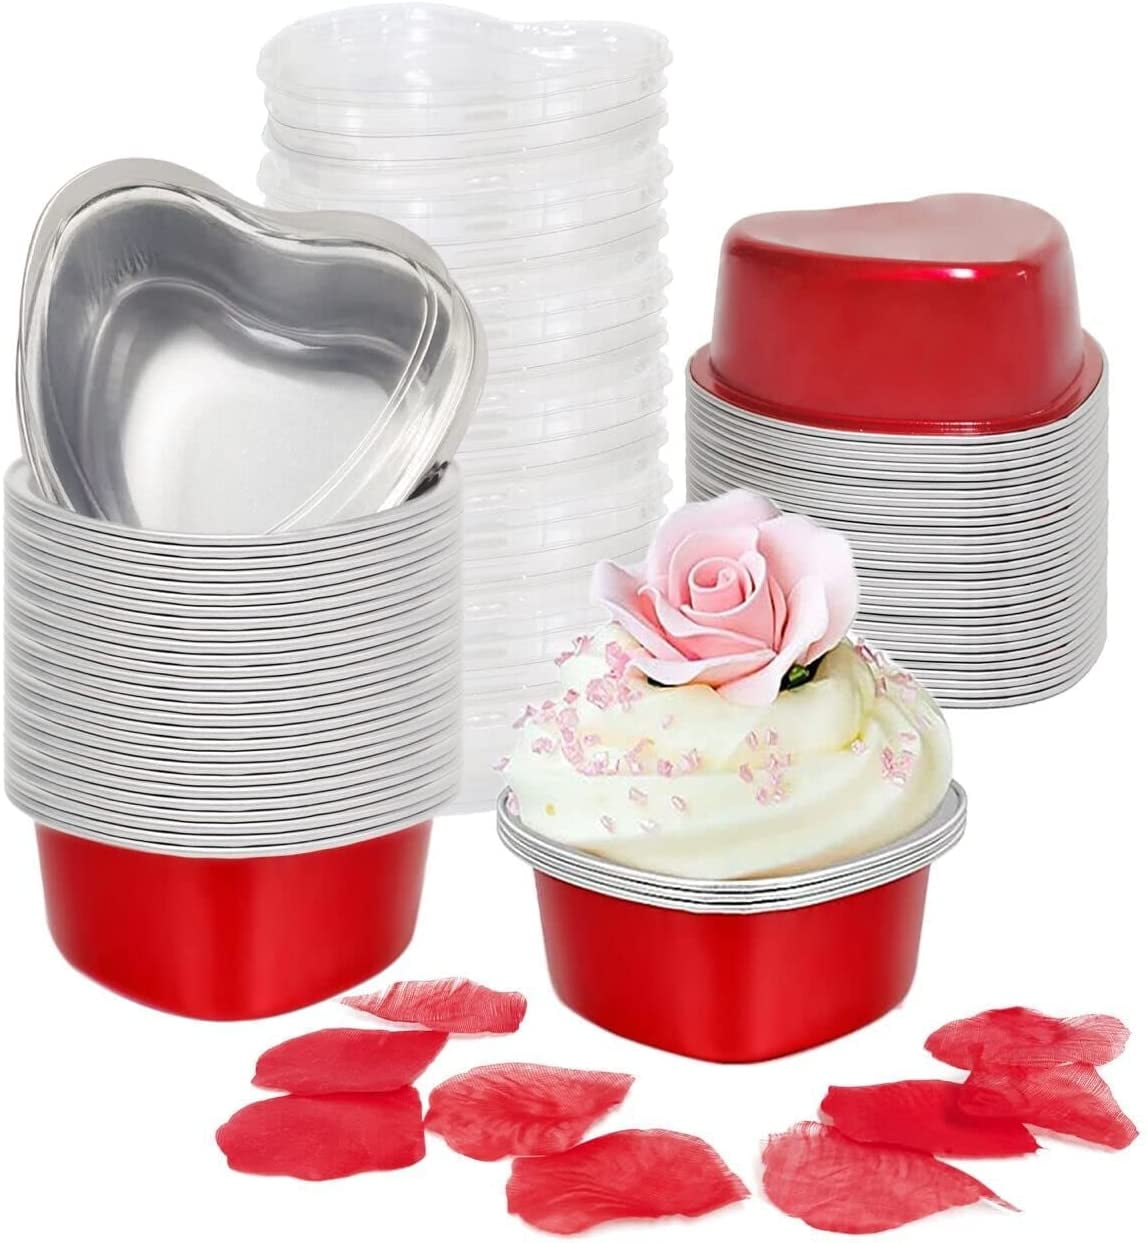 Konsait 100pcs Valentines Cupcake Wrappers and Toppers,Heart Lip Cupcake Toppers Cake Table Decorations,Valentines Baking Cups,Party Accessories for Valentine’s Day Decoration Favor Supplies 